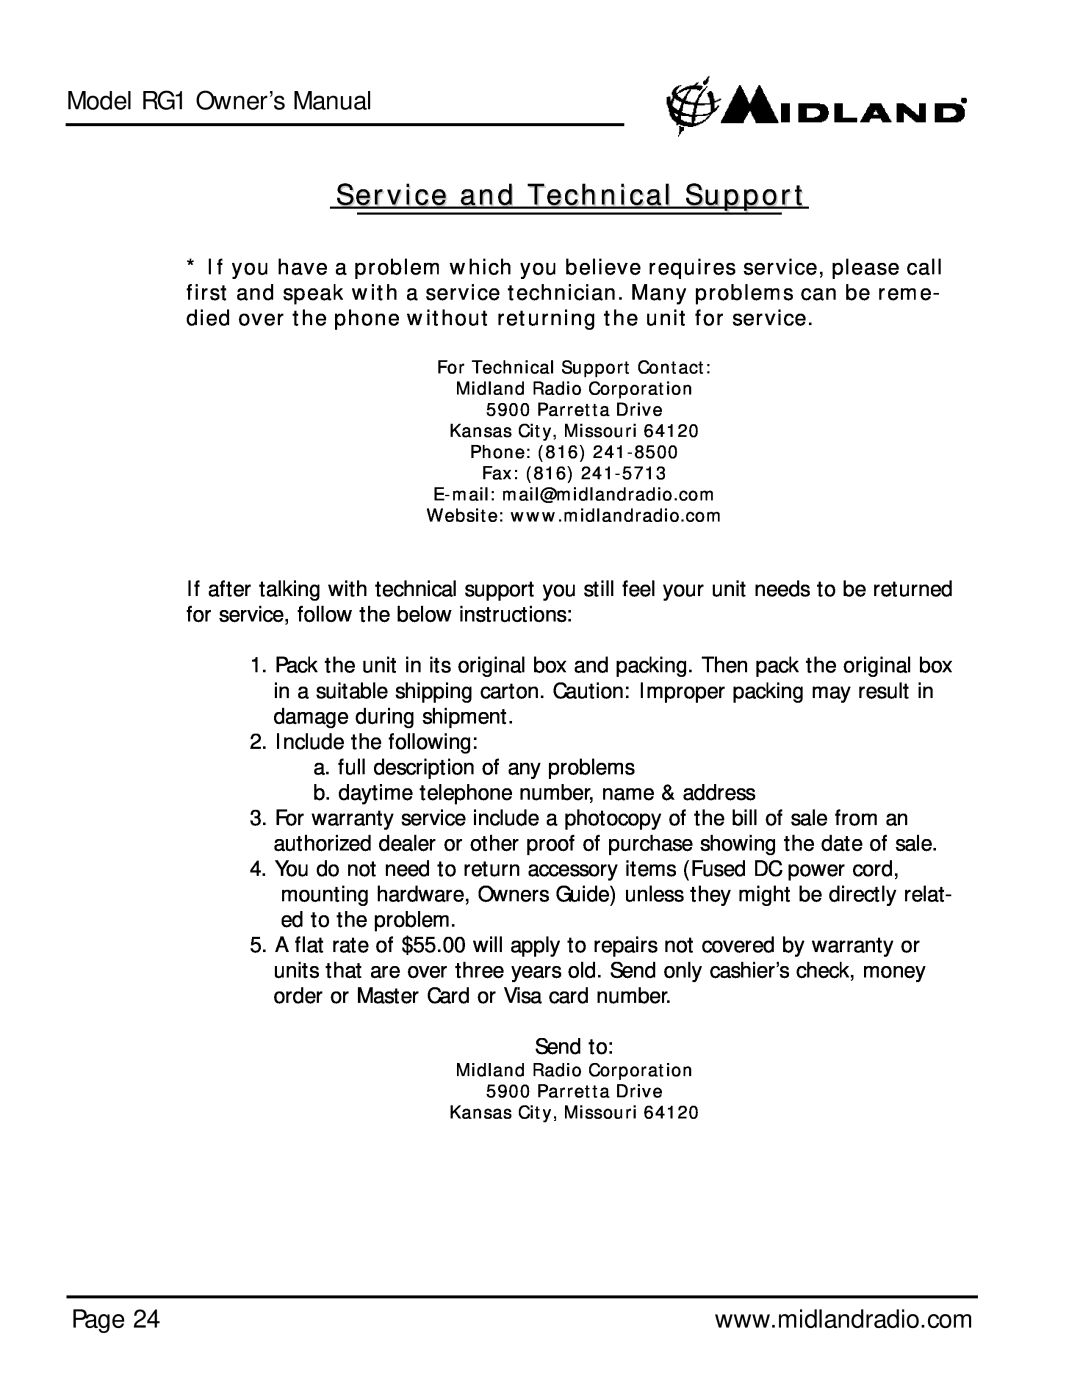 Midland Radio Regatta 1 owner manual Service and Technical Support, Page 